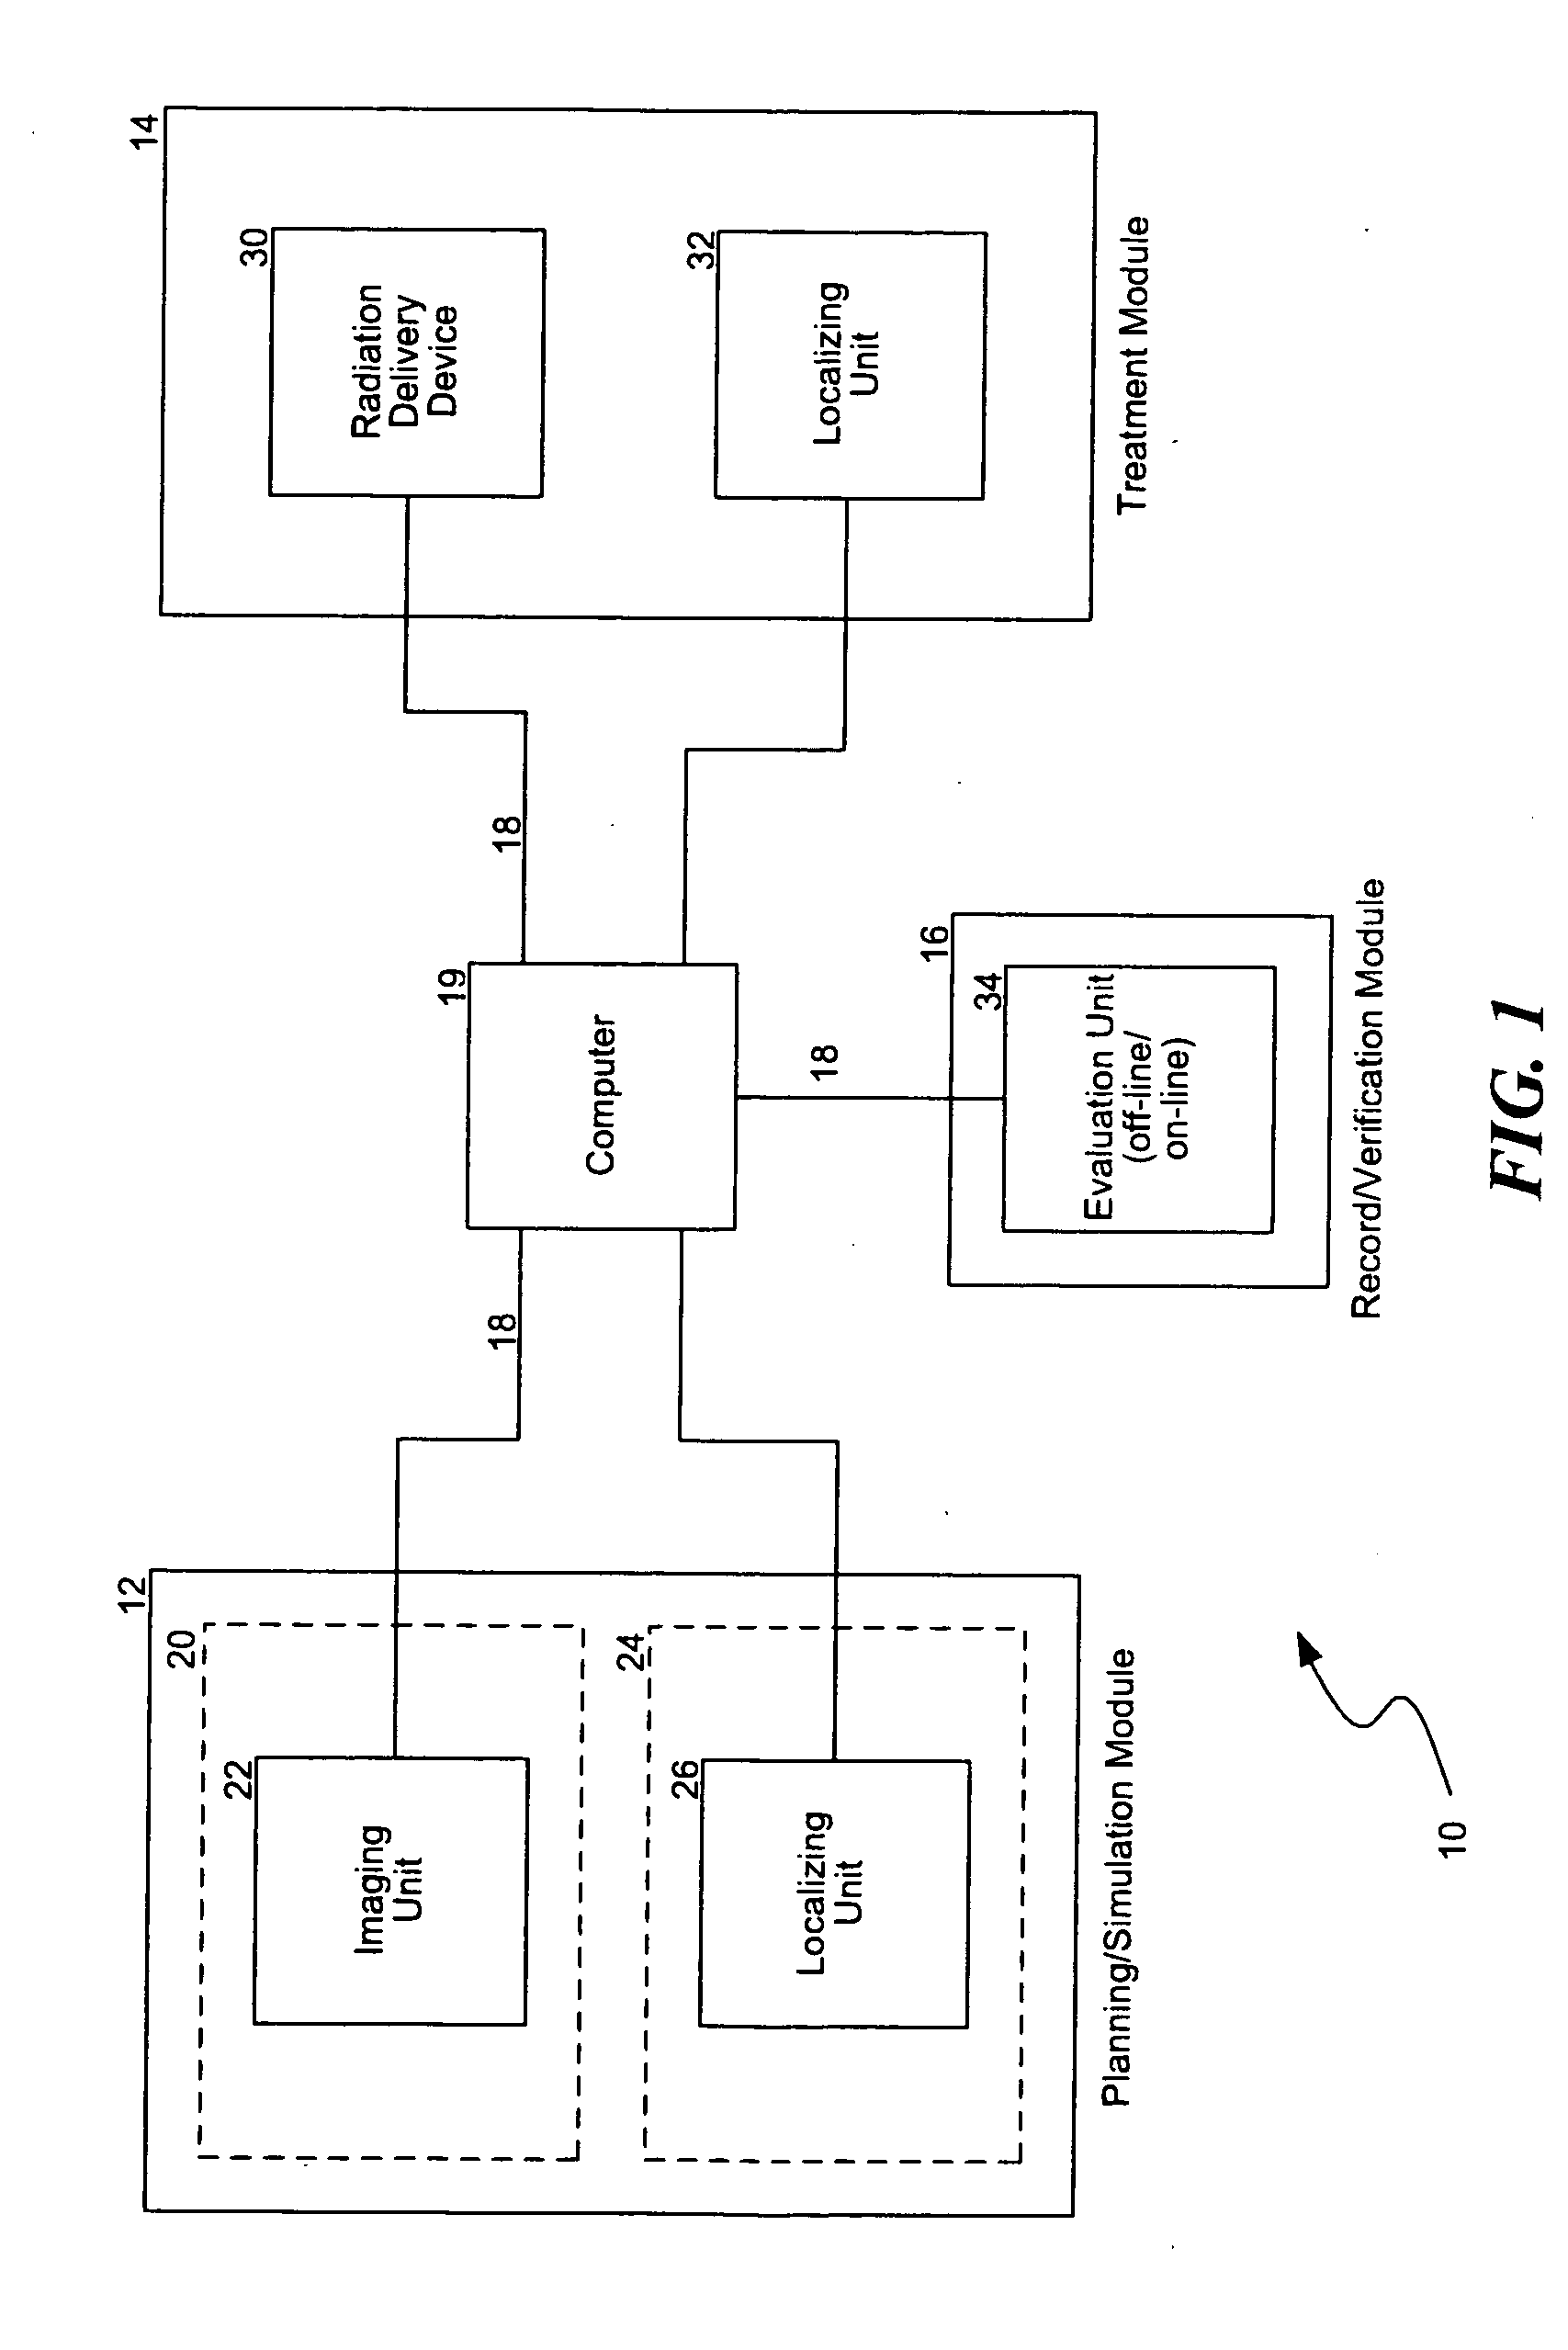 Integrated radiation therapy systems and methods for treating a target in a patient